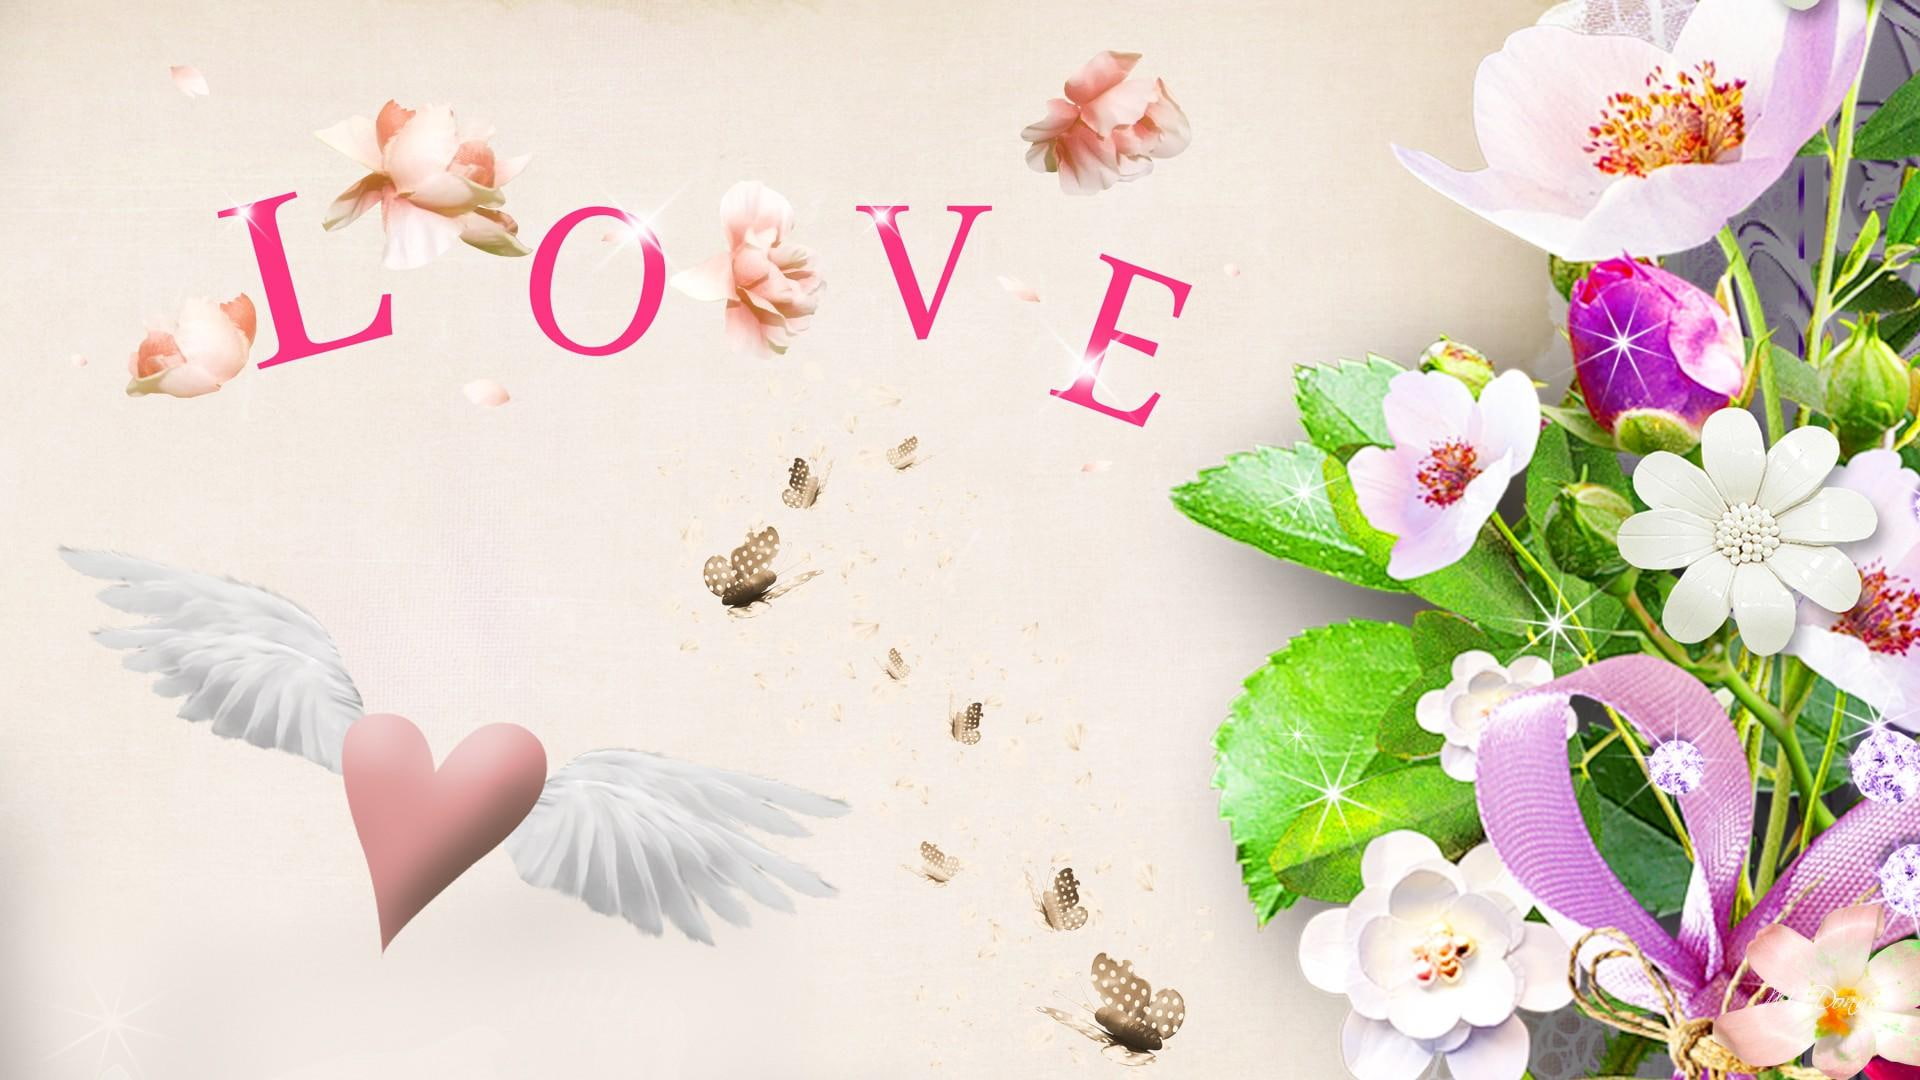 For Love, ribbon, stars, winged heart, flowers, spring, valentines day